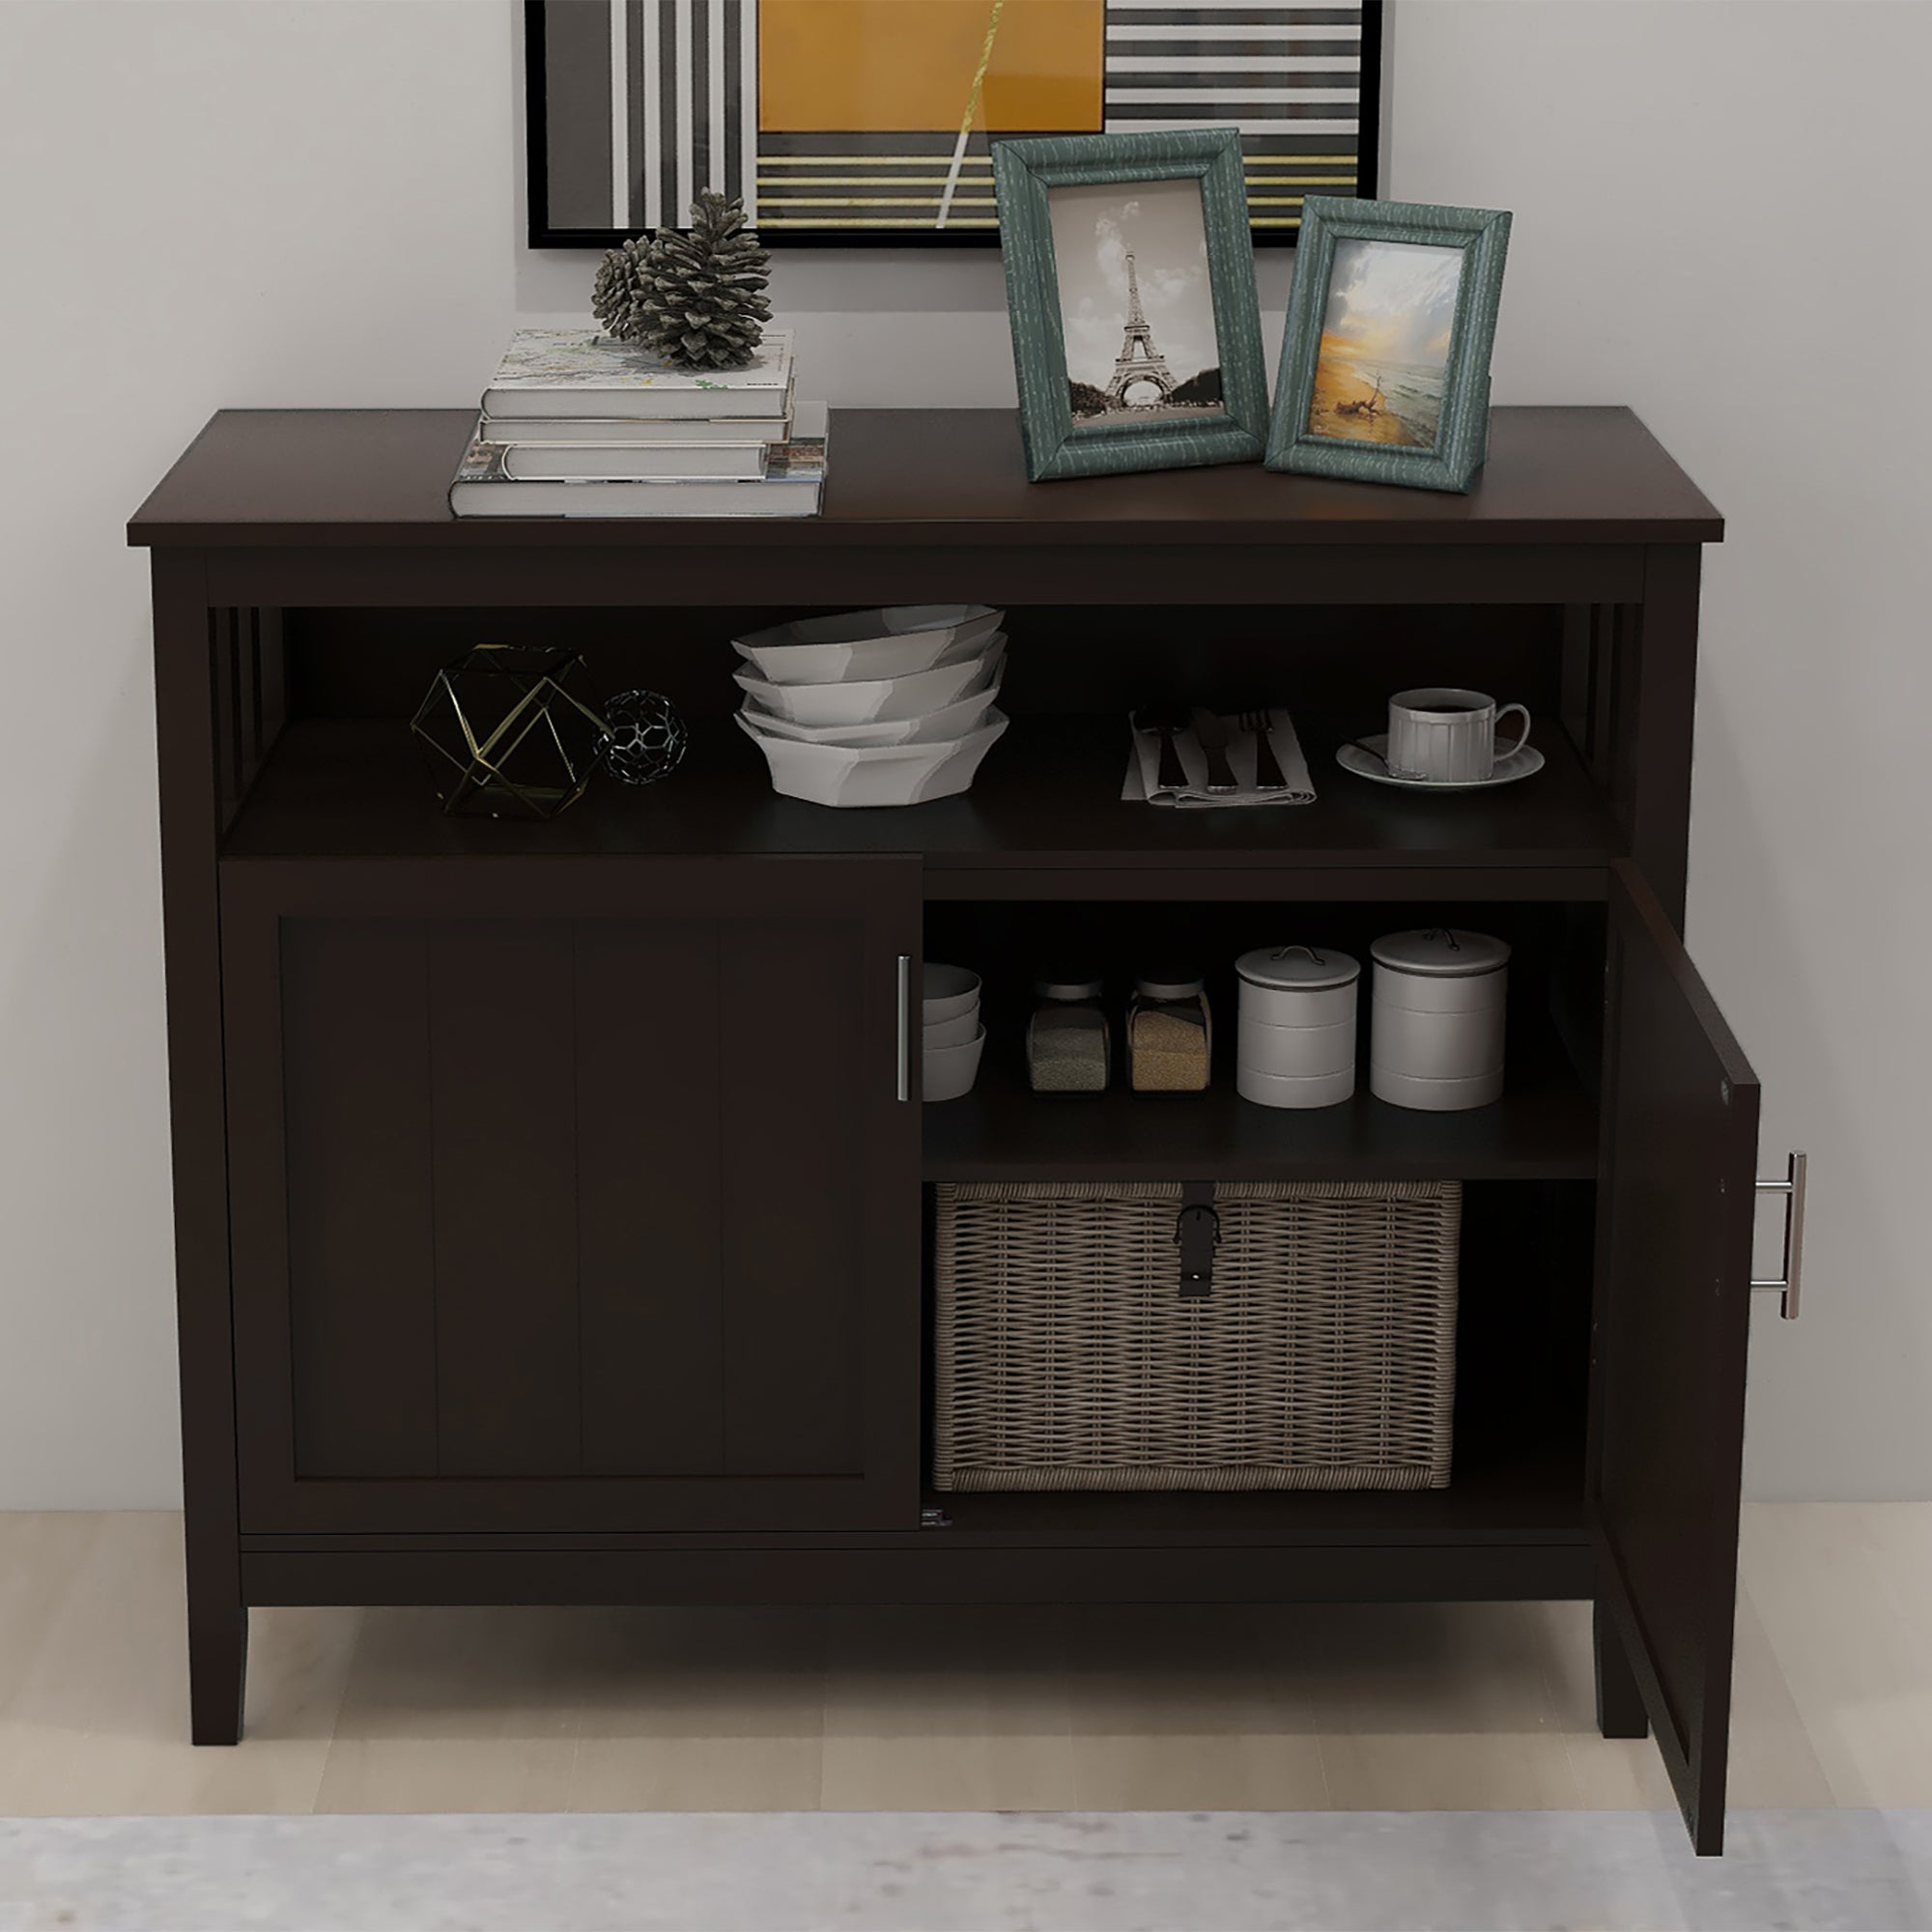 Kitchen Storage Sideboard And Buffet Server Cabinet